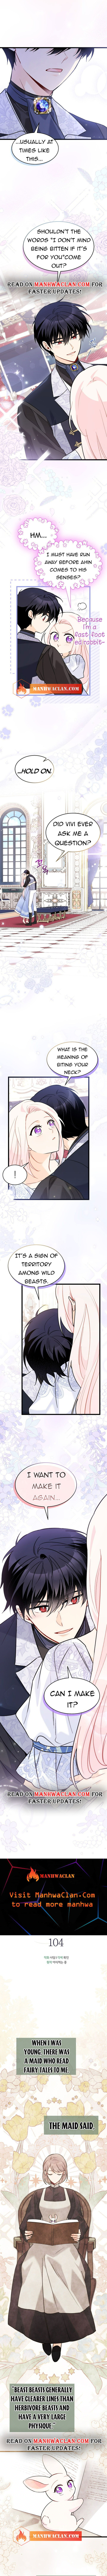 A Symbiotic Relationship Between A Rabbit And A Black Panther Chapter 104 page 2